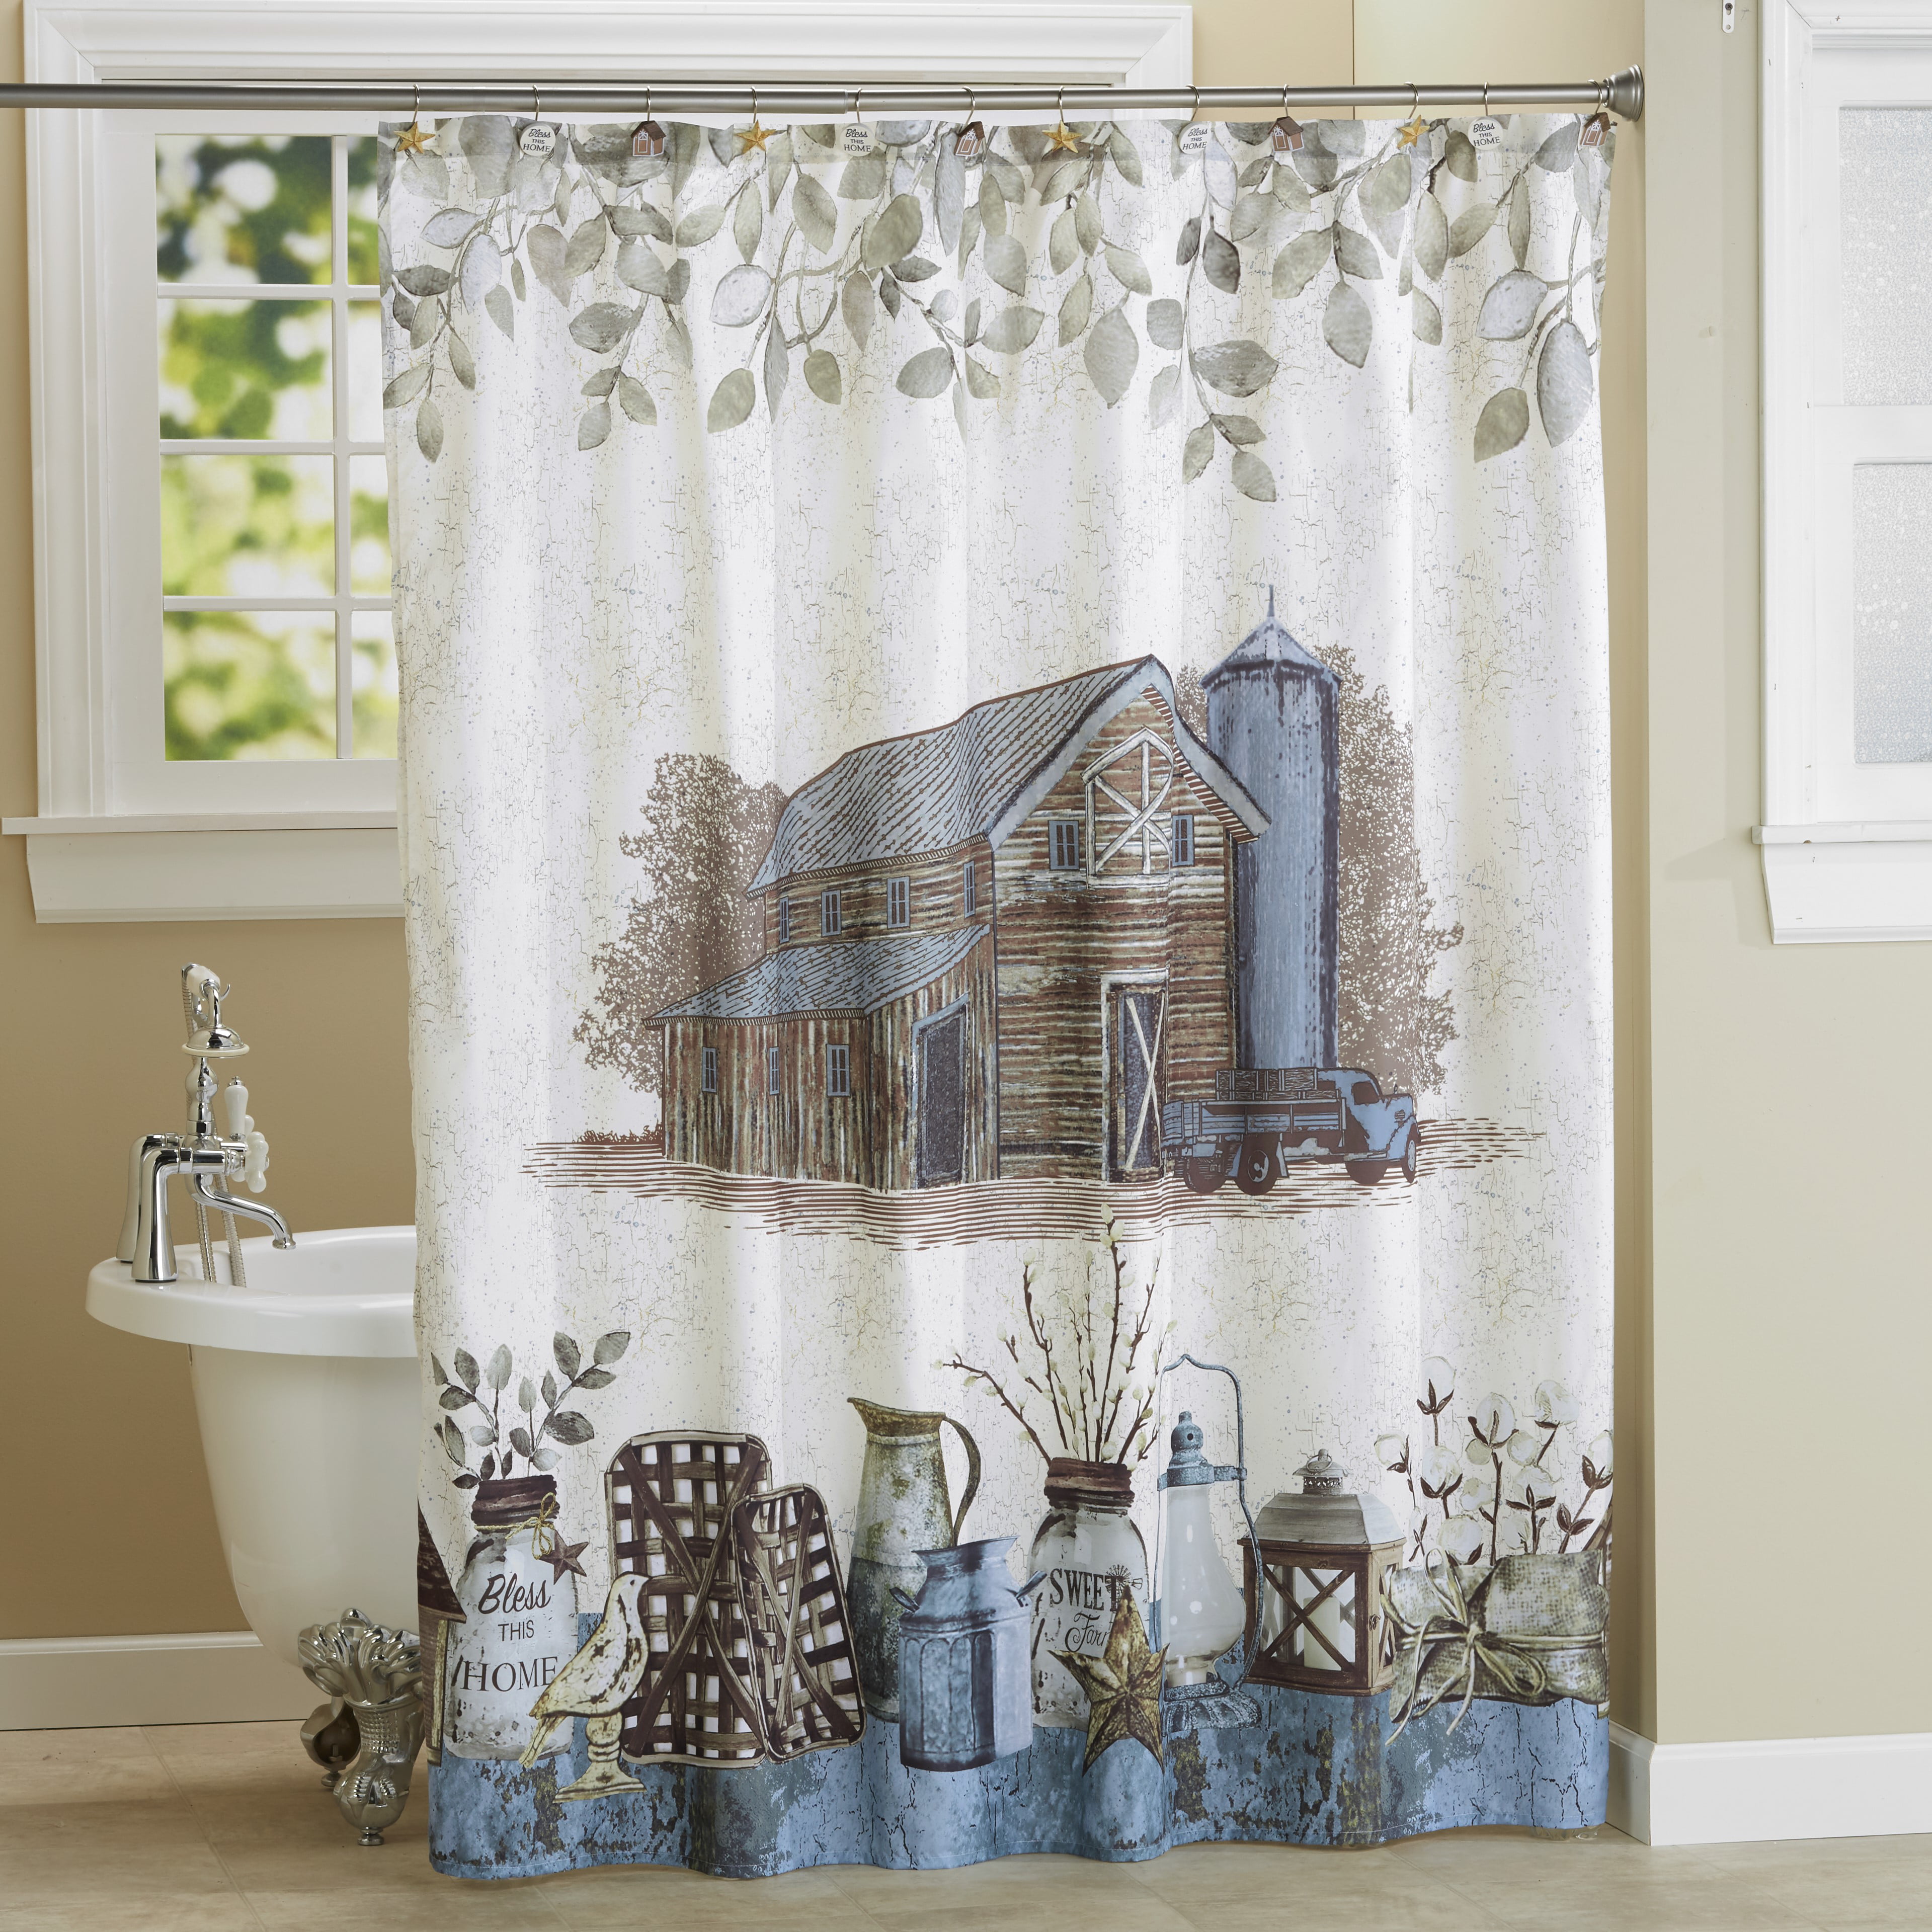 Rustic Truck Cow Farmhouse Fabric Shower Curtain Toilet Cover Rugs Mat Set 